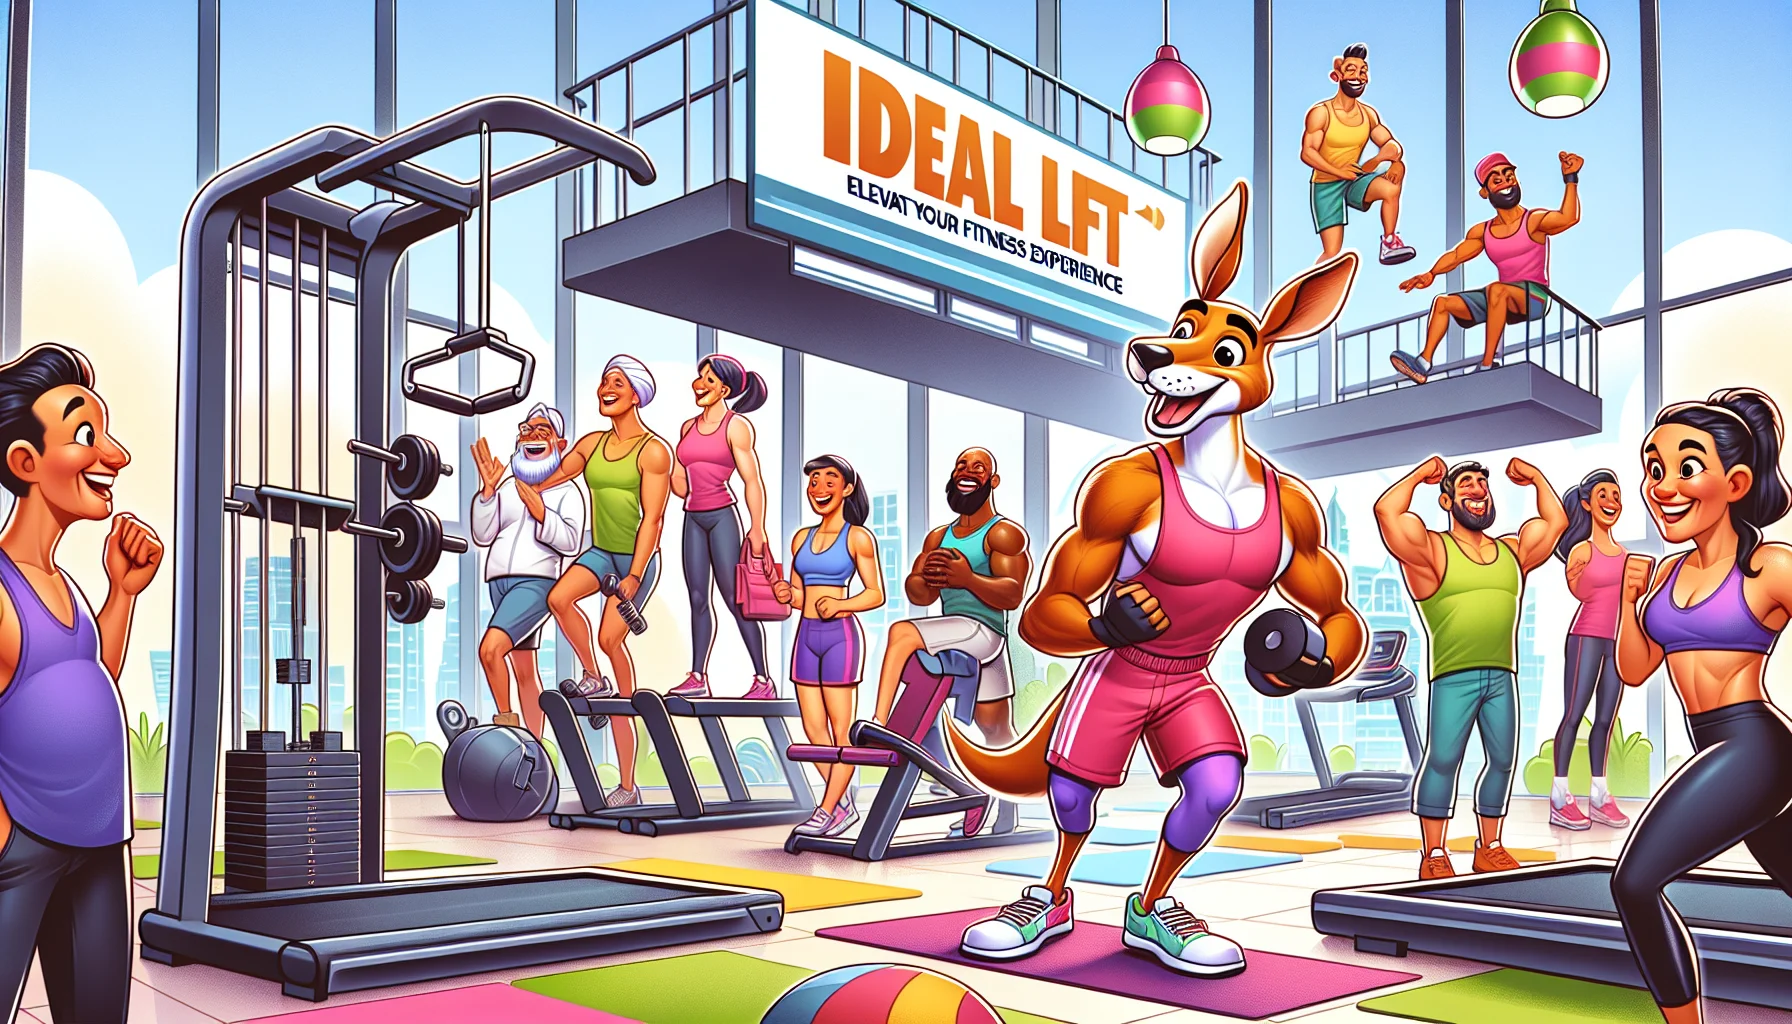 Create a vibrant and amusing illustration portraying a state-of-the-art fitness center named 'Ideal Lift: Elevate Your Fitness Experience'. The scene includes a wide array of modern fitness equipment, including treadmills, weight machines, and yoga mats, all in use. Have a charming caricature of a muscular kangaroo in colored gym-wear, indicating the fun aspect of working out. Also, include a group of diverse individuals of varying ages, genders, and descents, such as a Middle-Eastern female runner on the treadmill, a Caucasian elderly man lifting light weights, a Black male teacher leading a yoga class, and a South Asian woman on an elliptical machine, all laughing and having a good time.